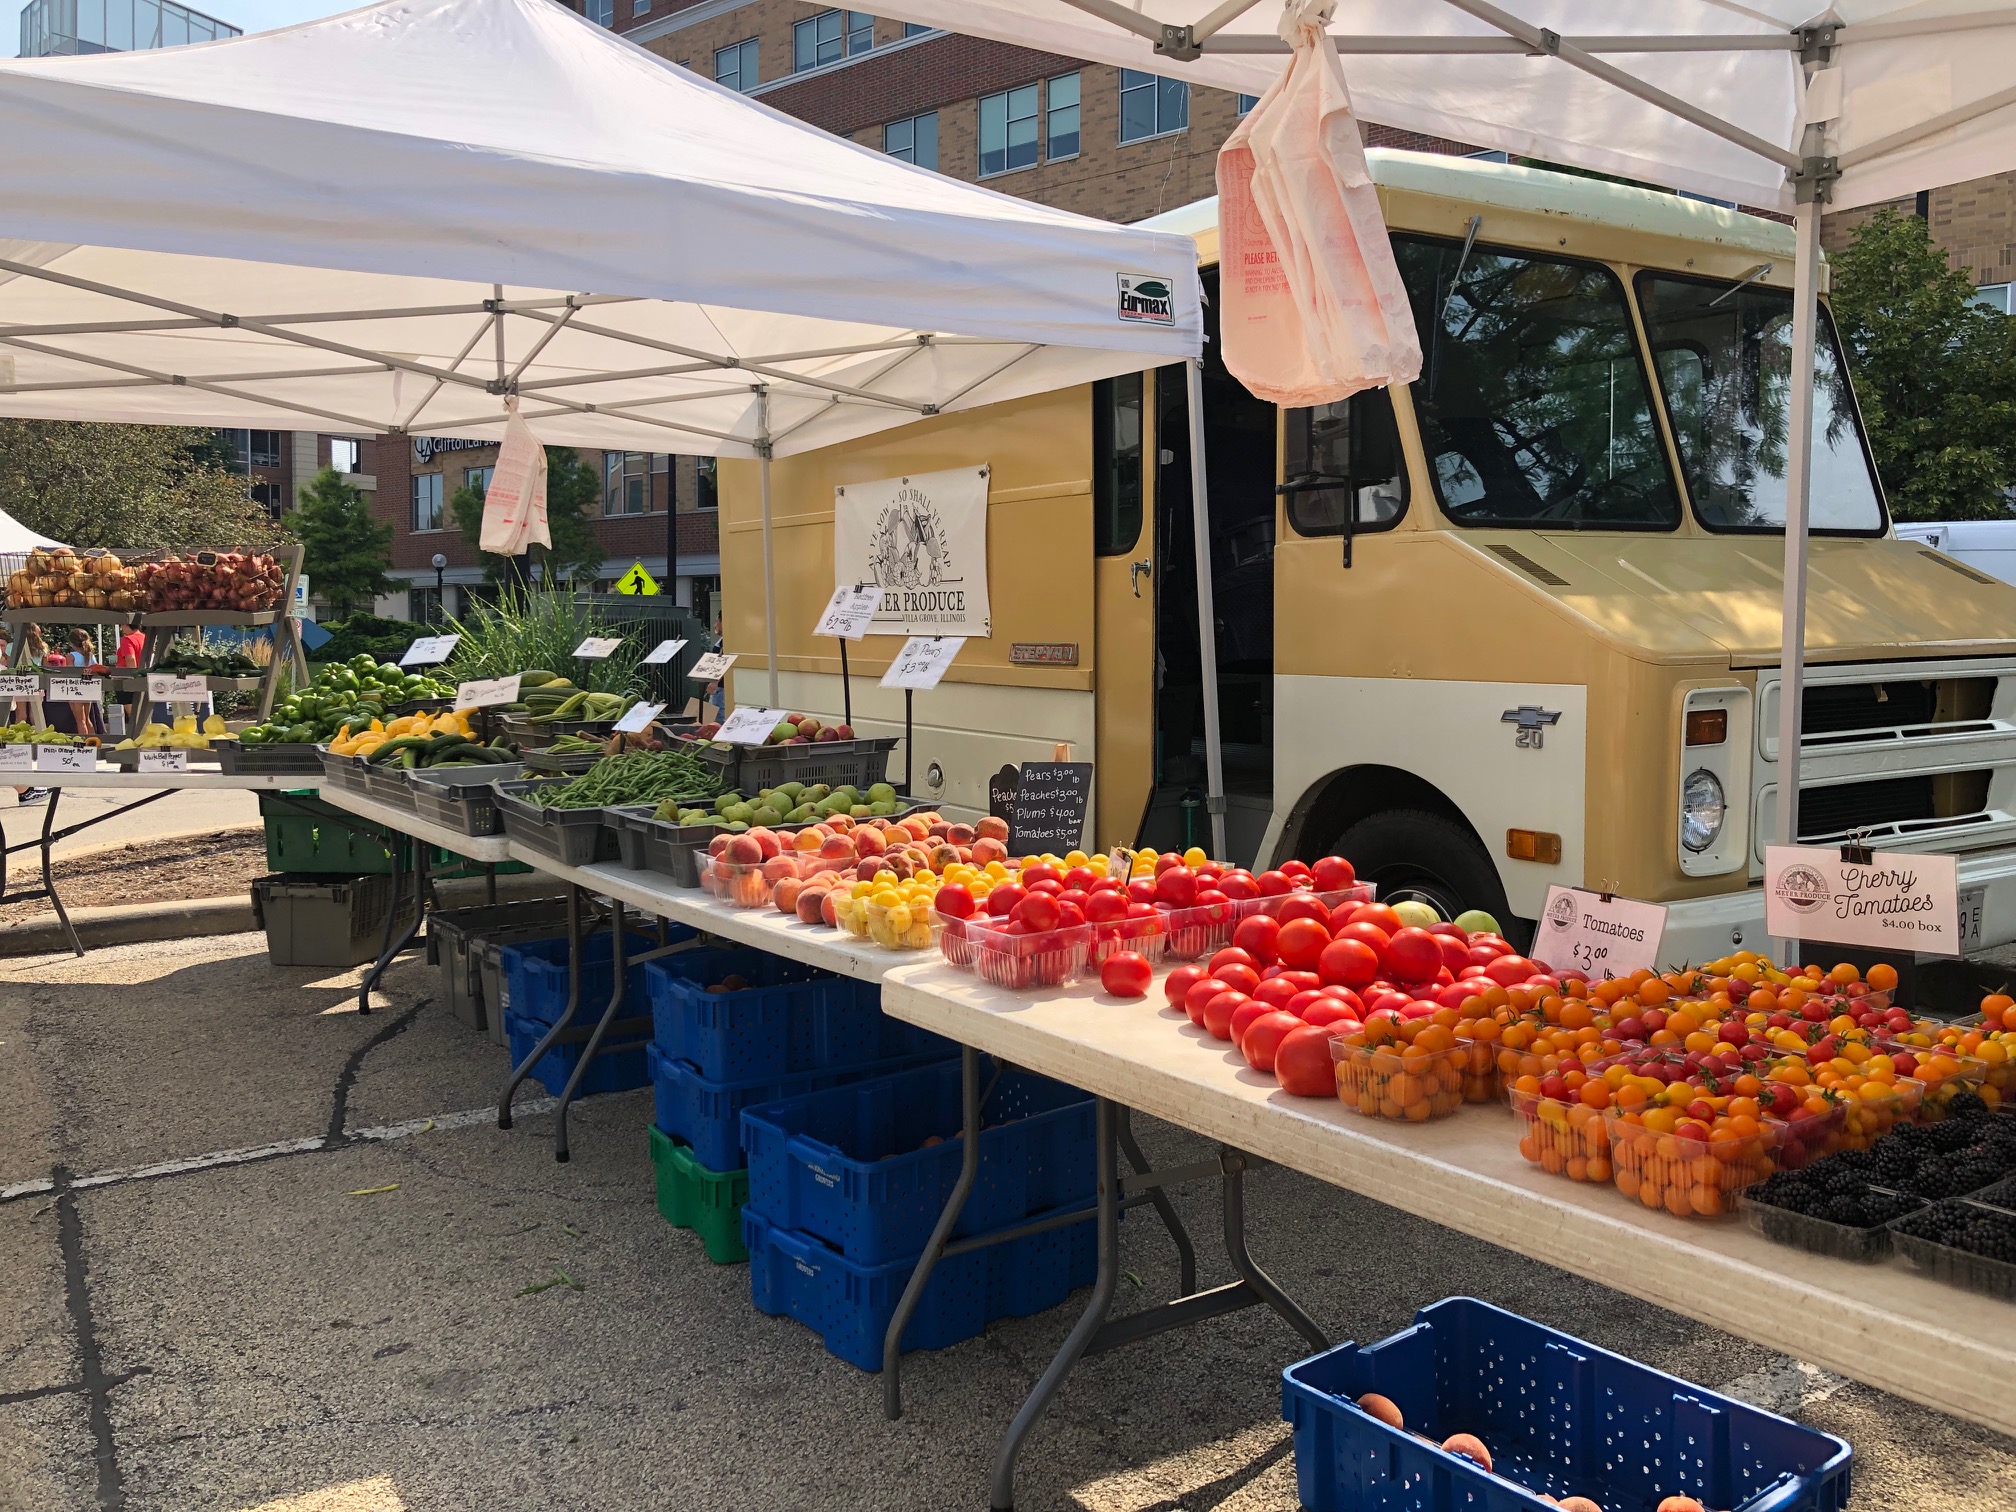 Two folding tables are set up beside each other, making one long rectangular counter for Meyer Produce to lay out the produce for sale at the Champaign Farmers' Market. Behind the tables, there is a vintage bus that is beige and light yellow. Photo by Alyssa Buckley.